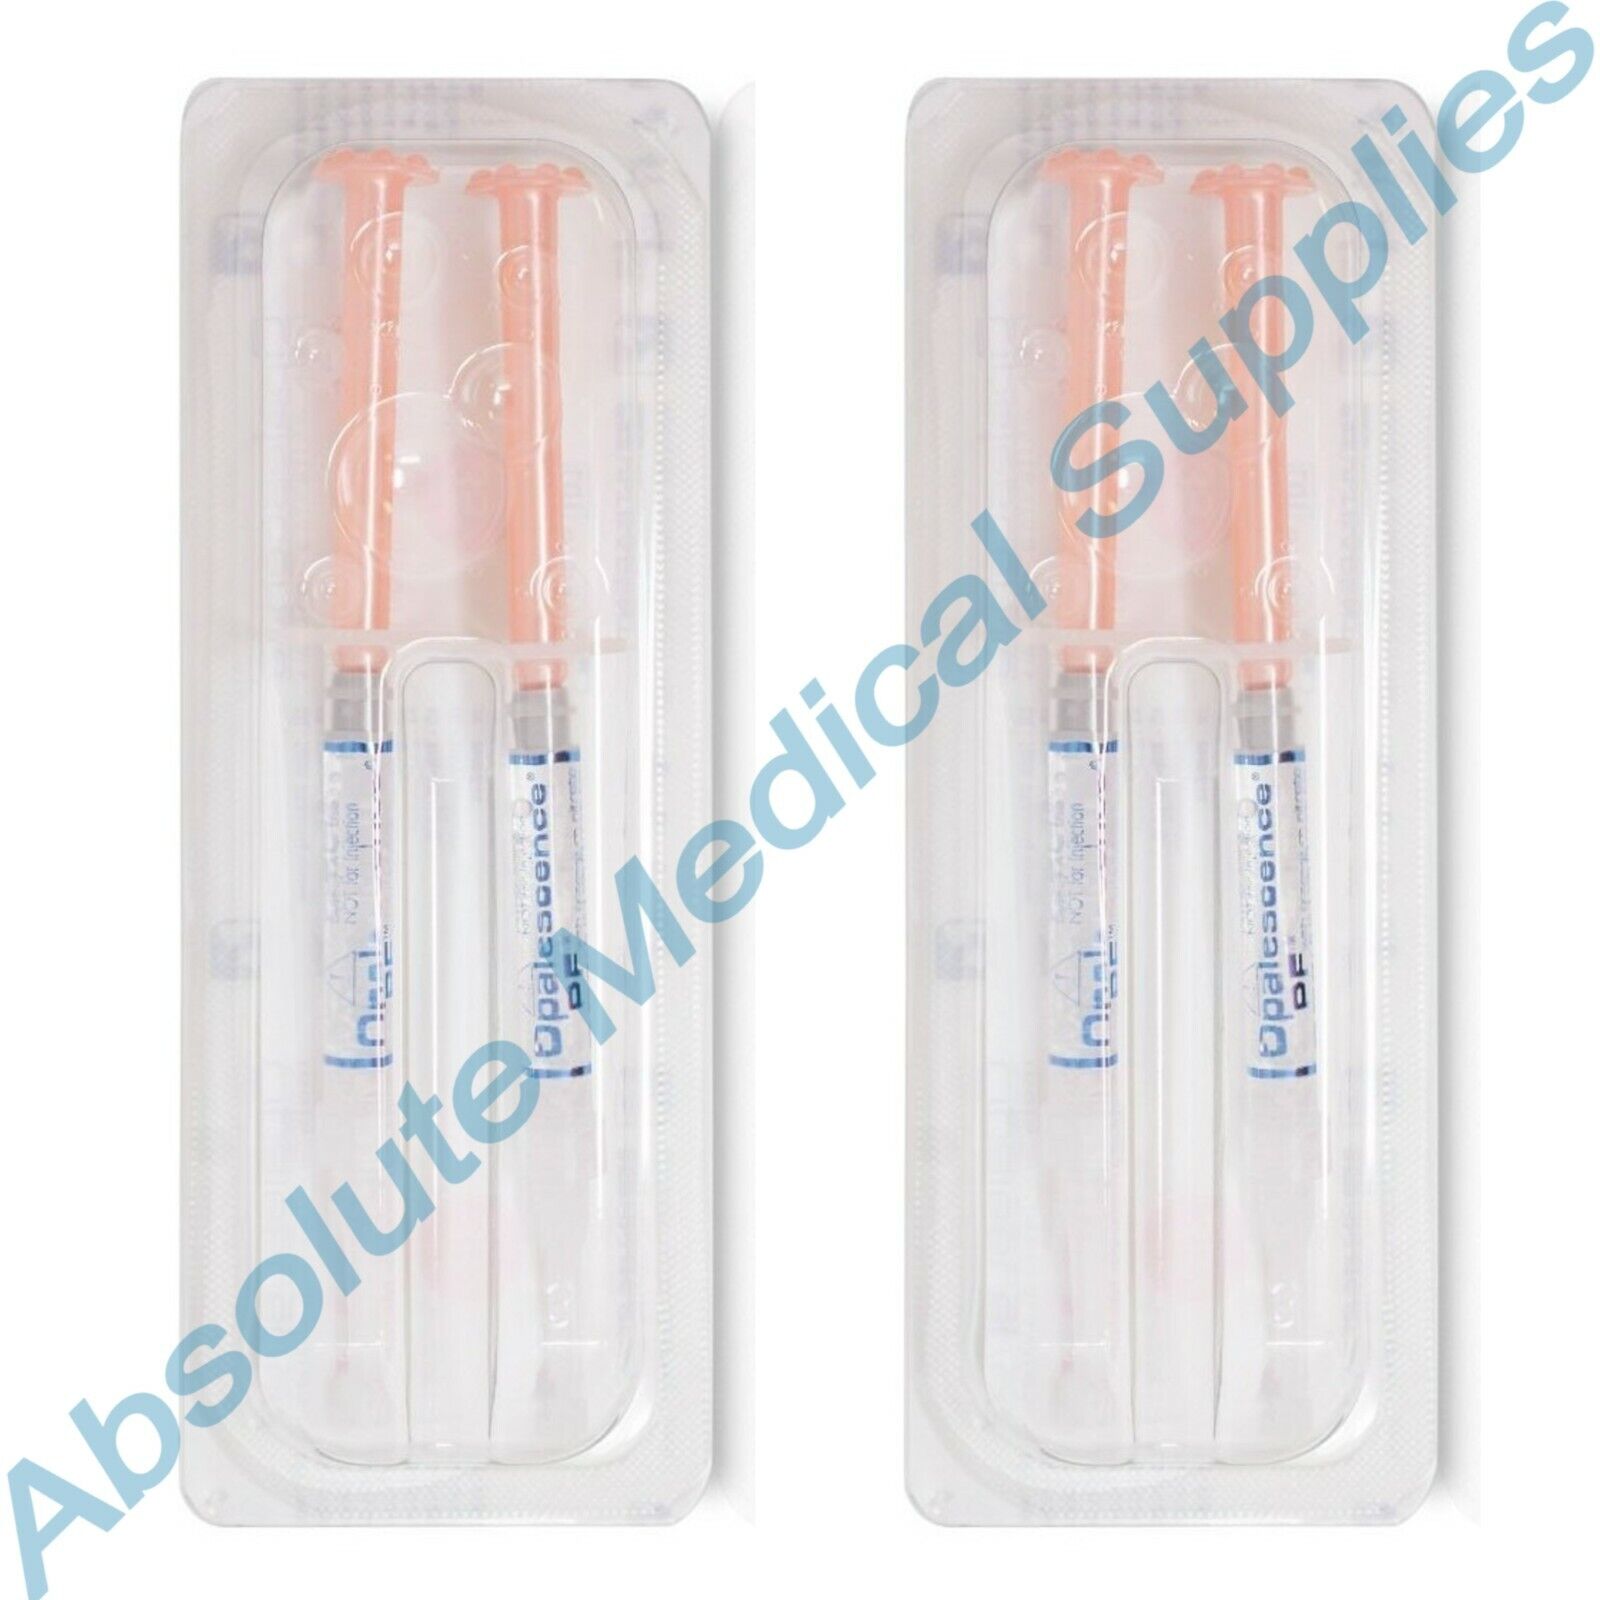 *2-Pack* Ultradent Opalescence PF 20% Tooth Whitening Refills Melon Flavor 5401 Opalescence 5401-U